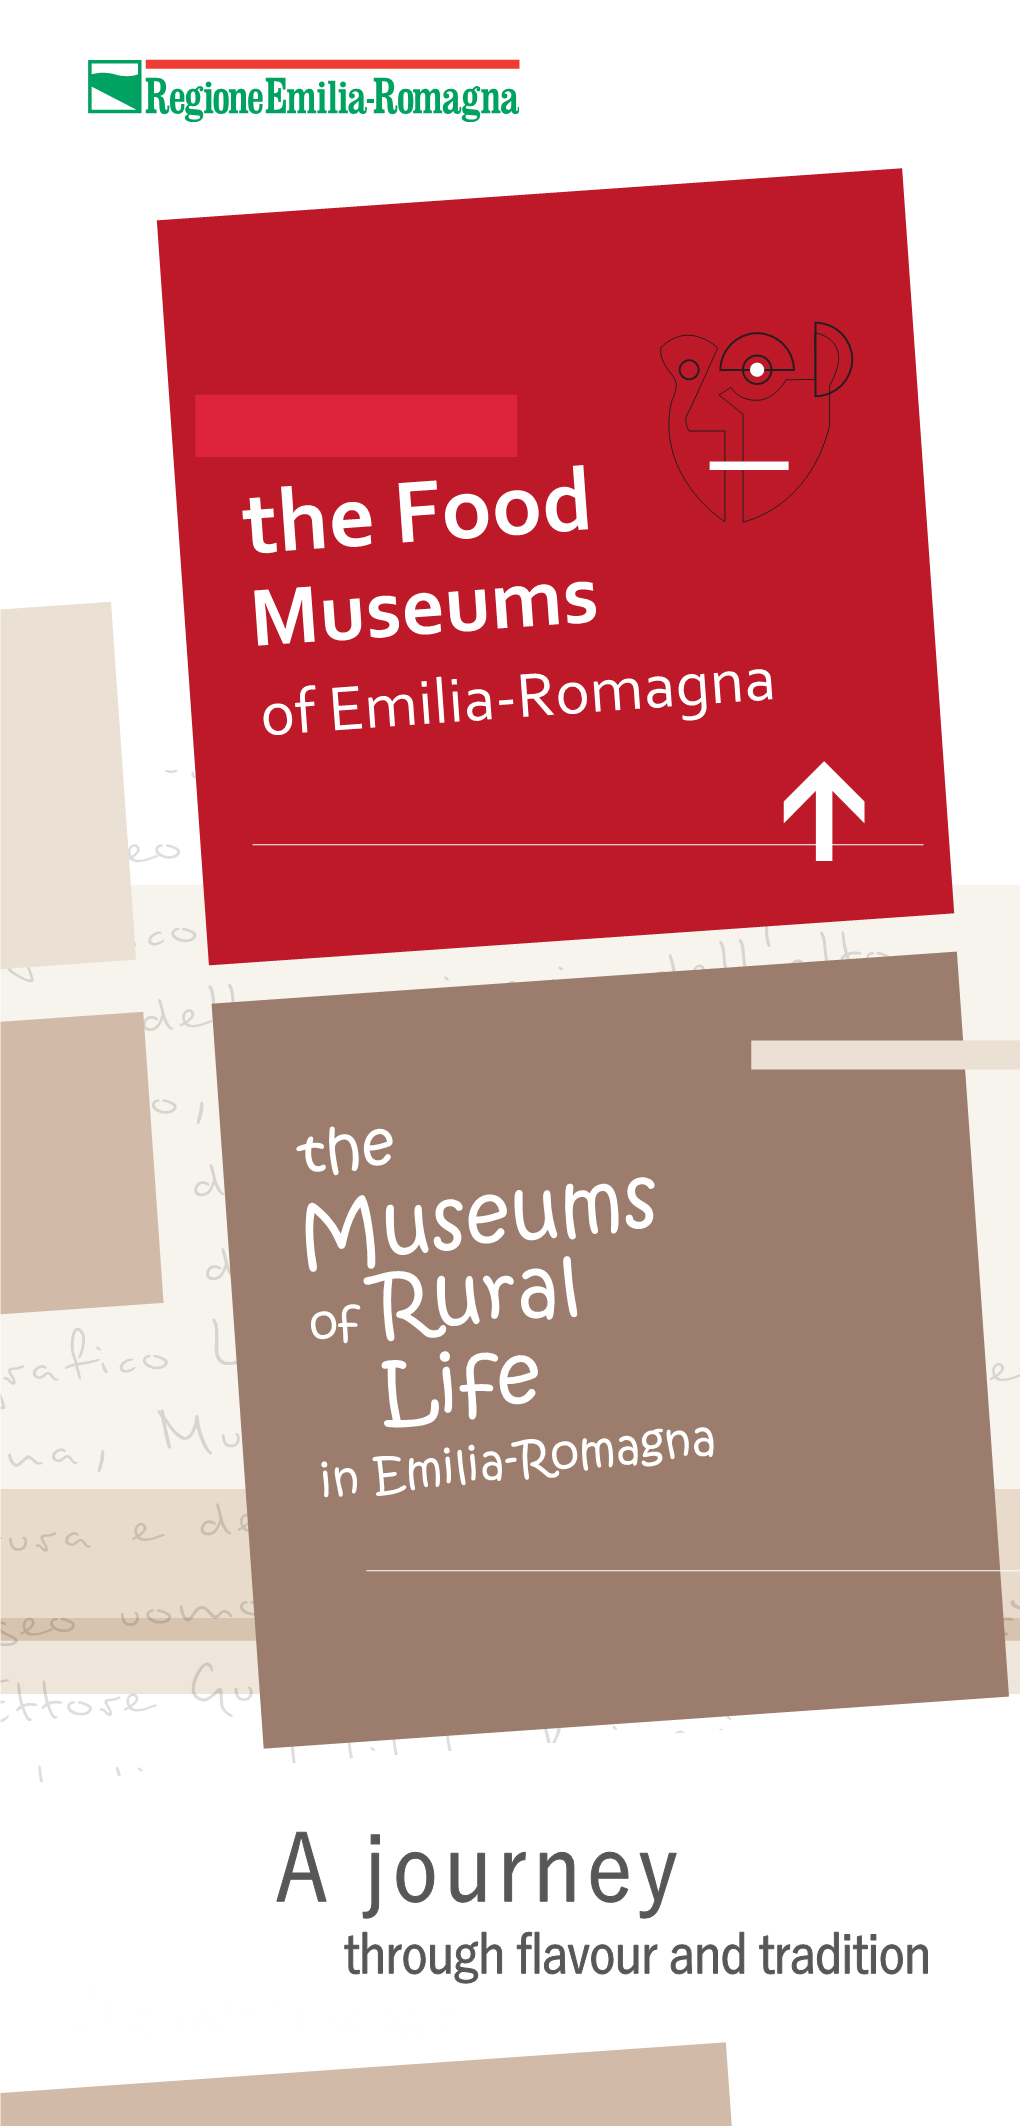 A Journey Through Flavour and Tradition the Food the Museums 1 Museums of Rural of Emilia-Romagna Life in Emilia-Romagna